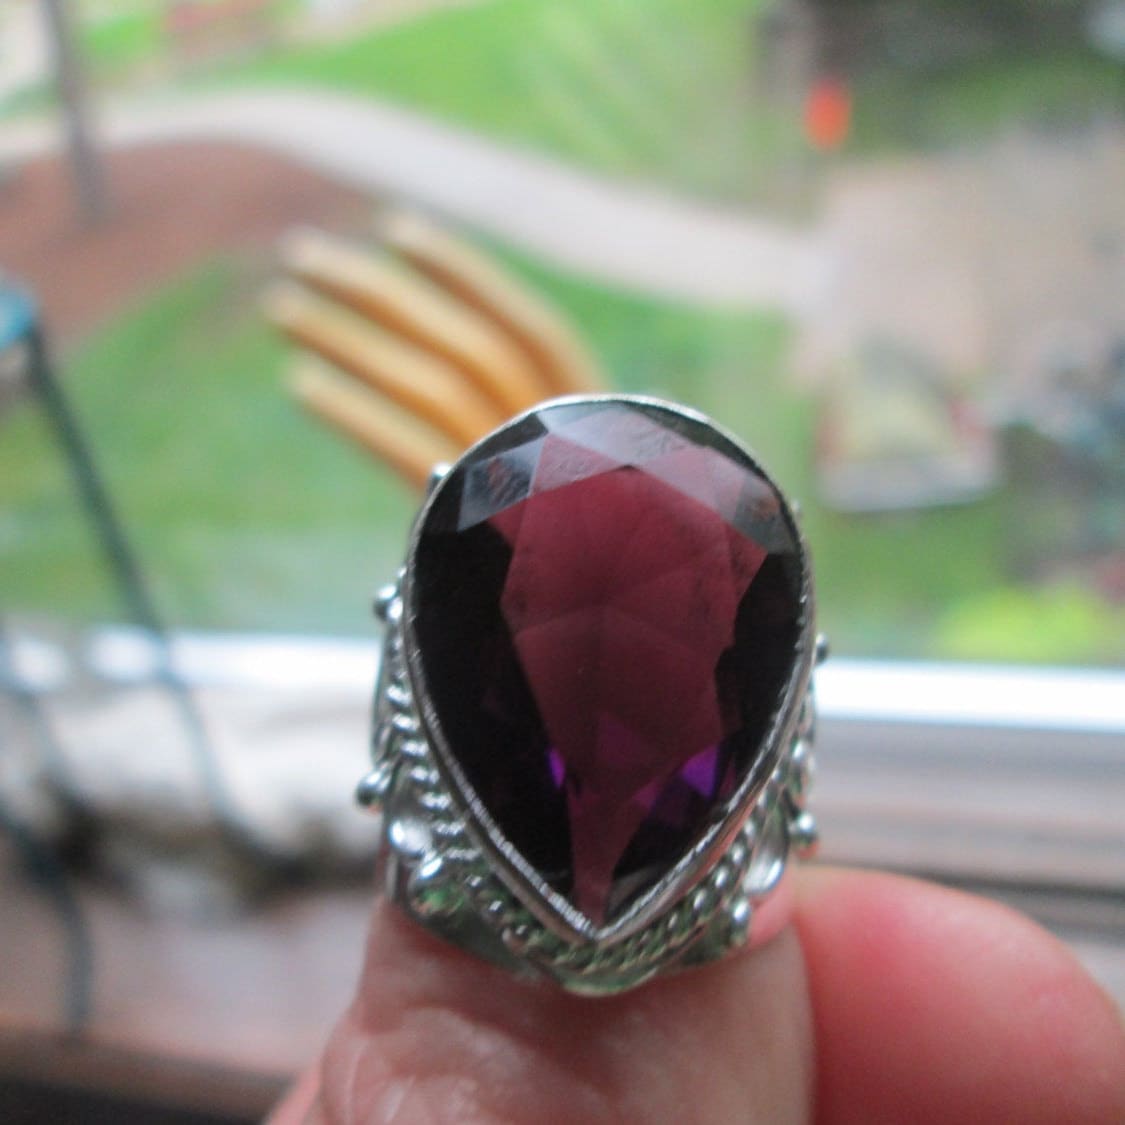 Excited to share the latest addition to my #etsy shop: Genuine 5.00CT Amethyst Purple 925 Sterling Silver Ring Size 8, Weight 9.1 Grams etsy.me/3YZCvtC #purple #amethyst #unisexadults #silver #925ringsz8 #genuineamethyst #purpleamethyst #sterlingsilverpolish #s